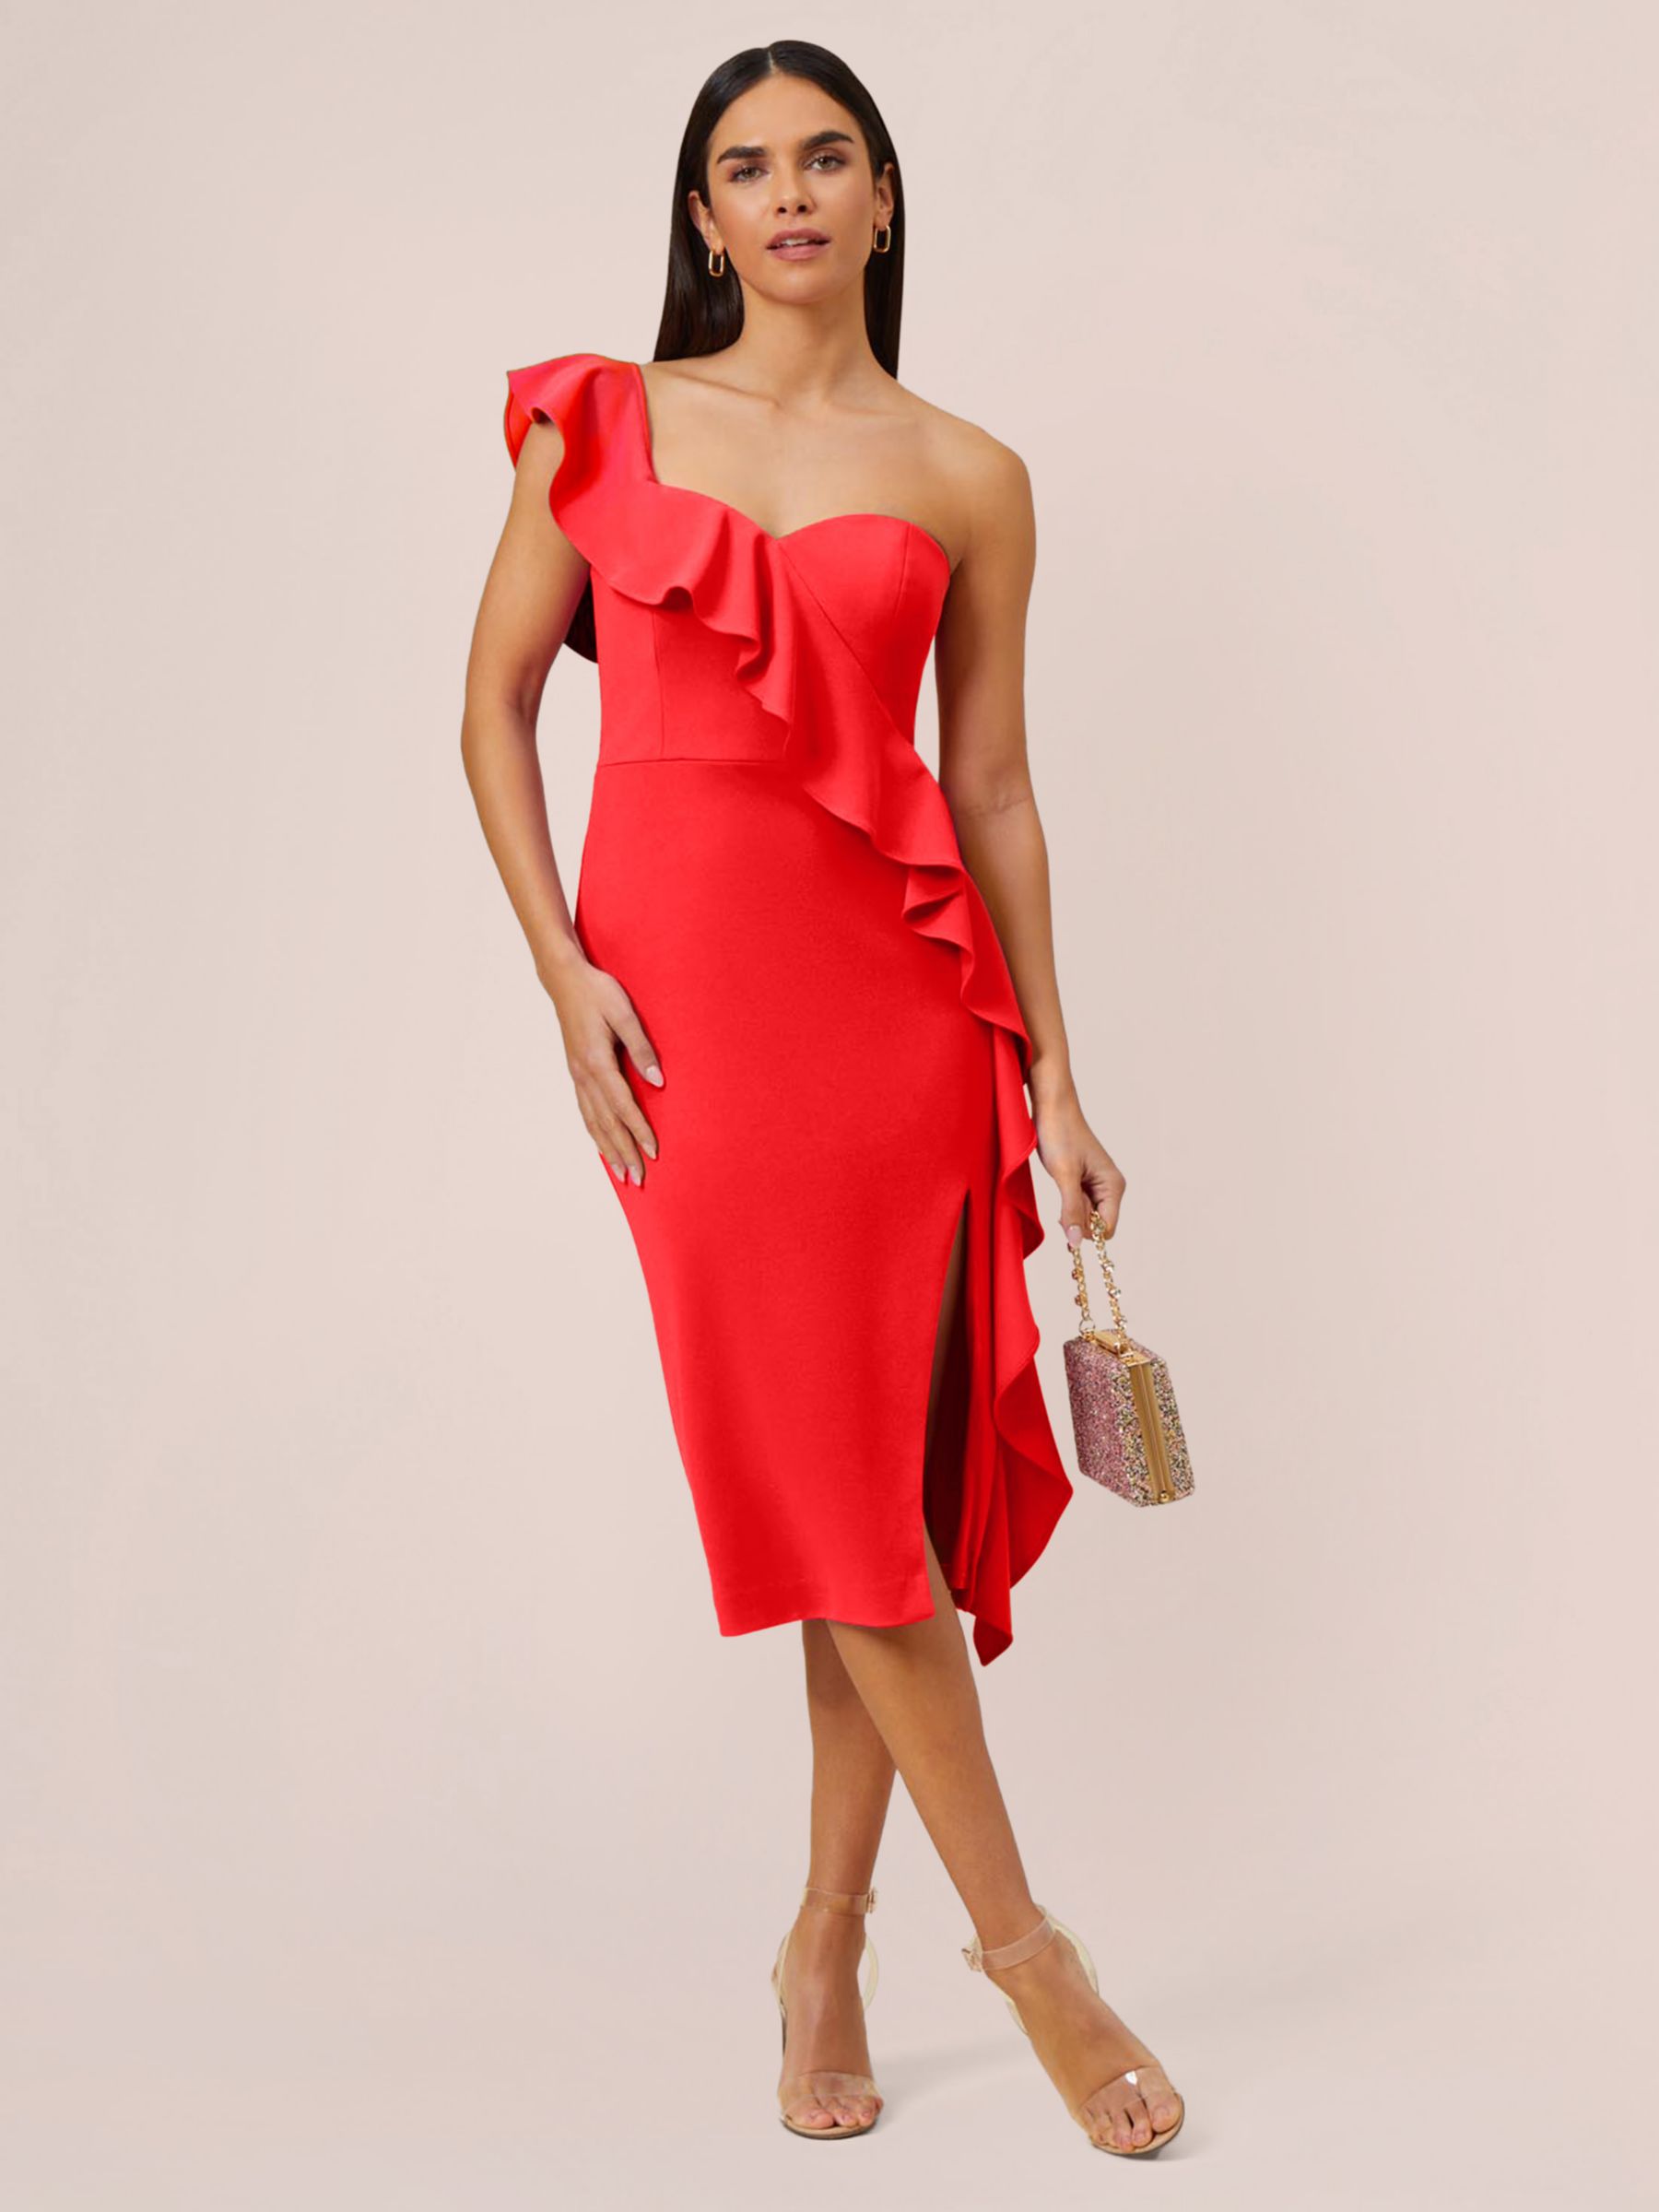 Aidan by Adrianna Papell Knit Crepe Cocktail Dress, Flame Red, 8